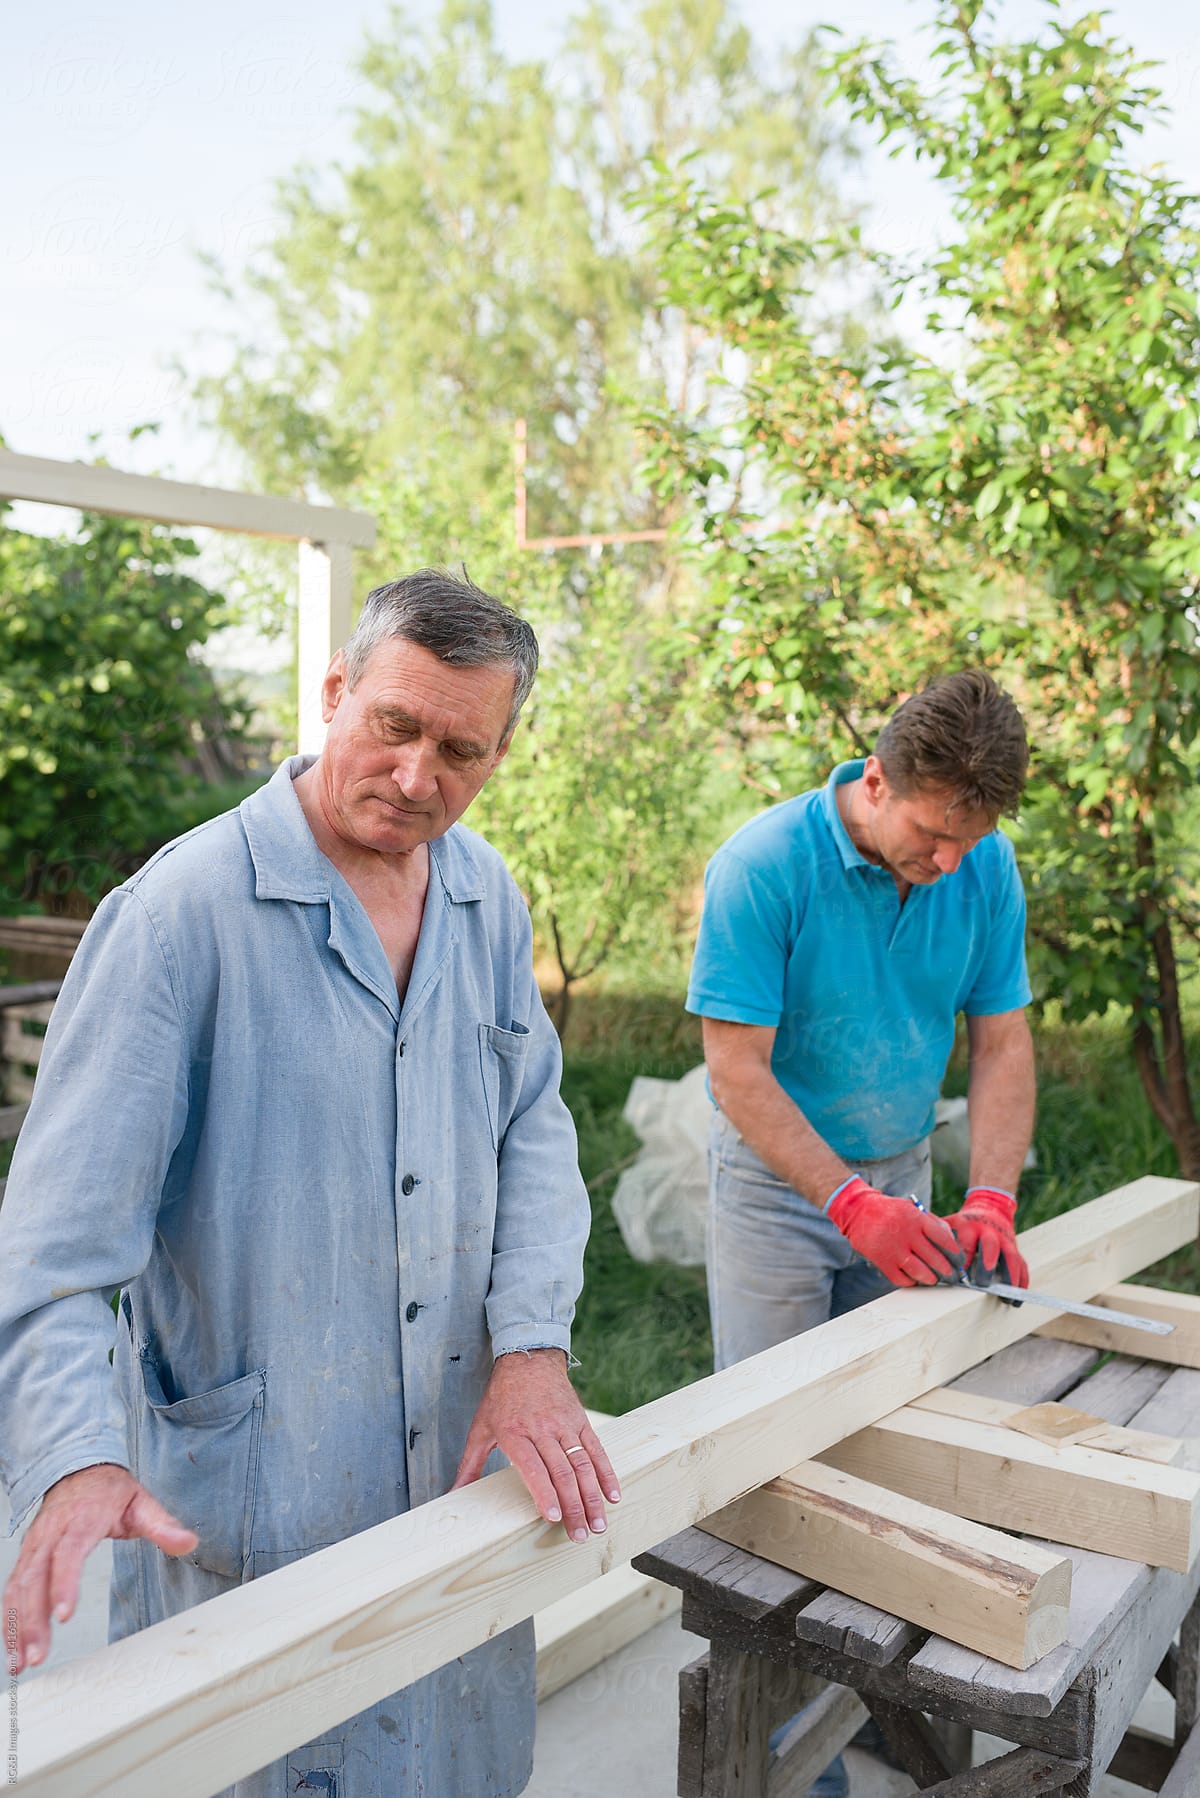 Male carpenters taking measurements of wooden plank outdoor